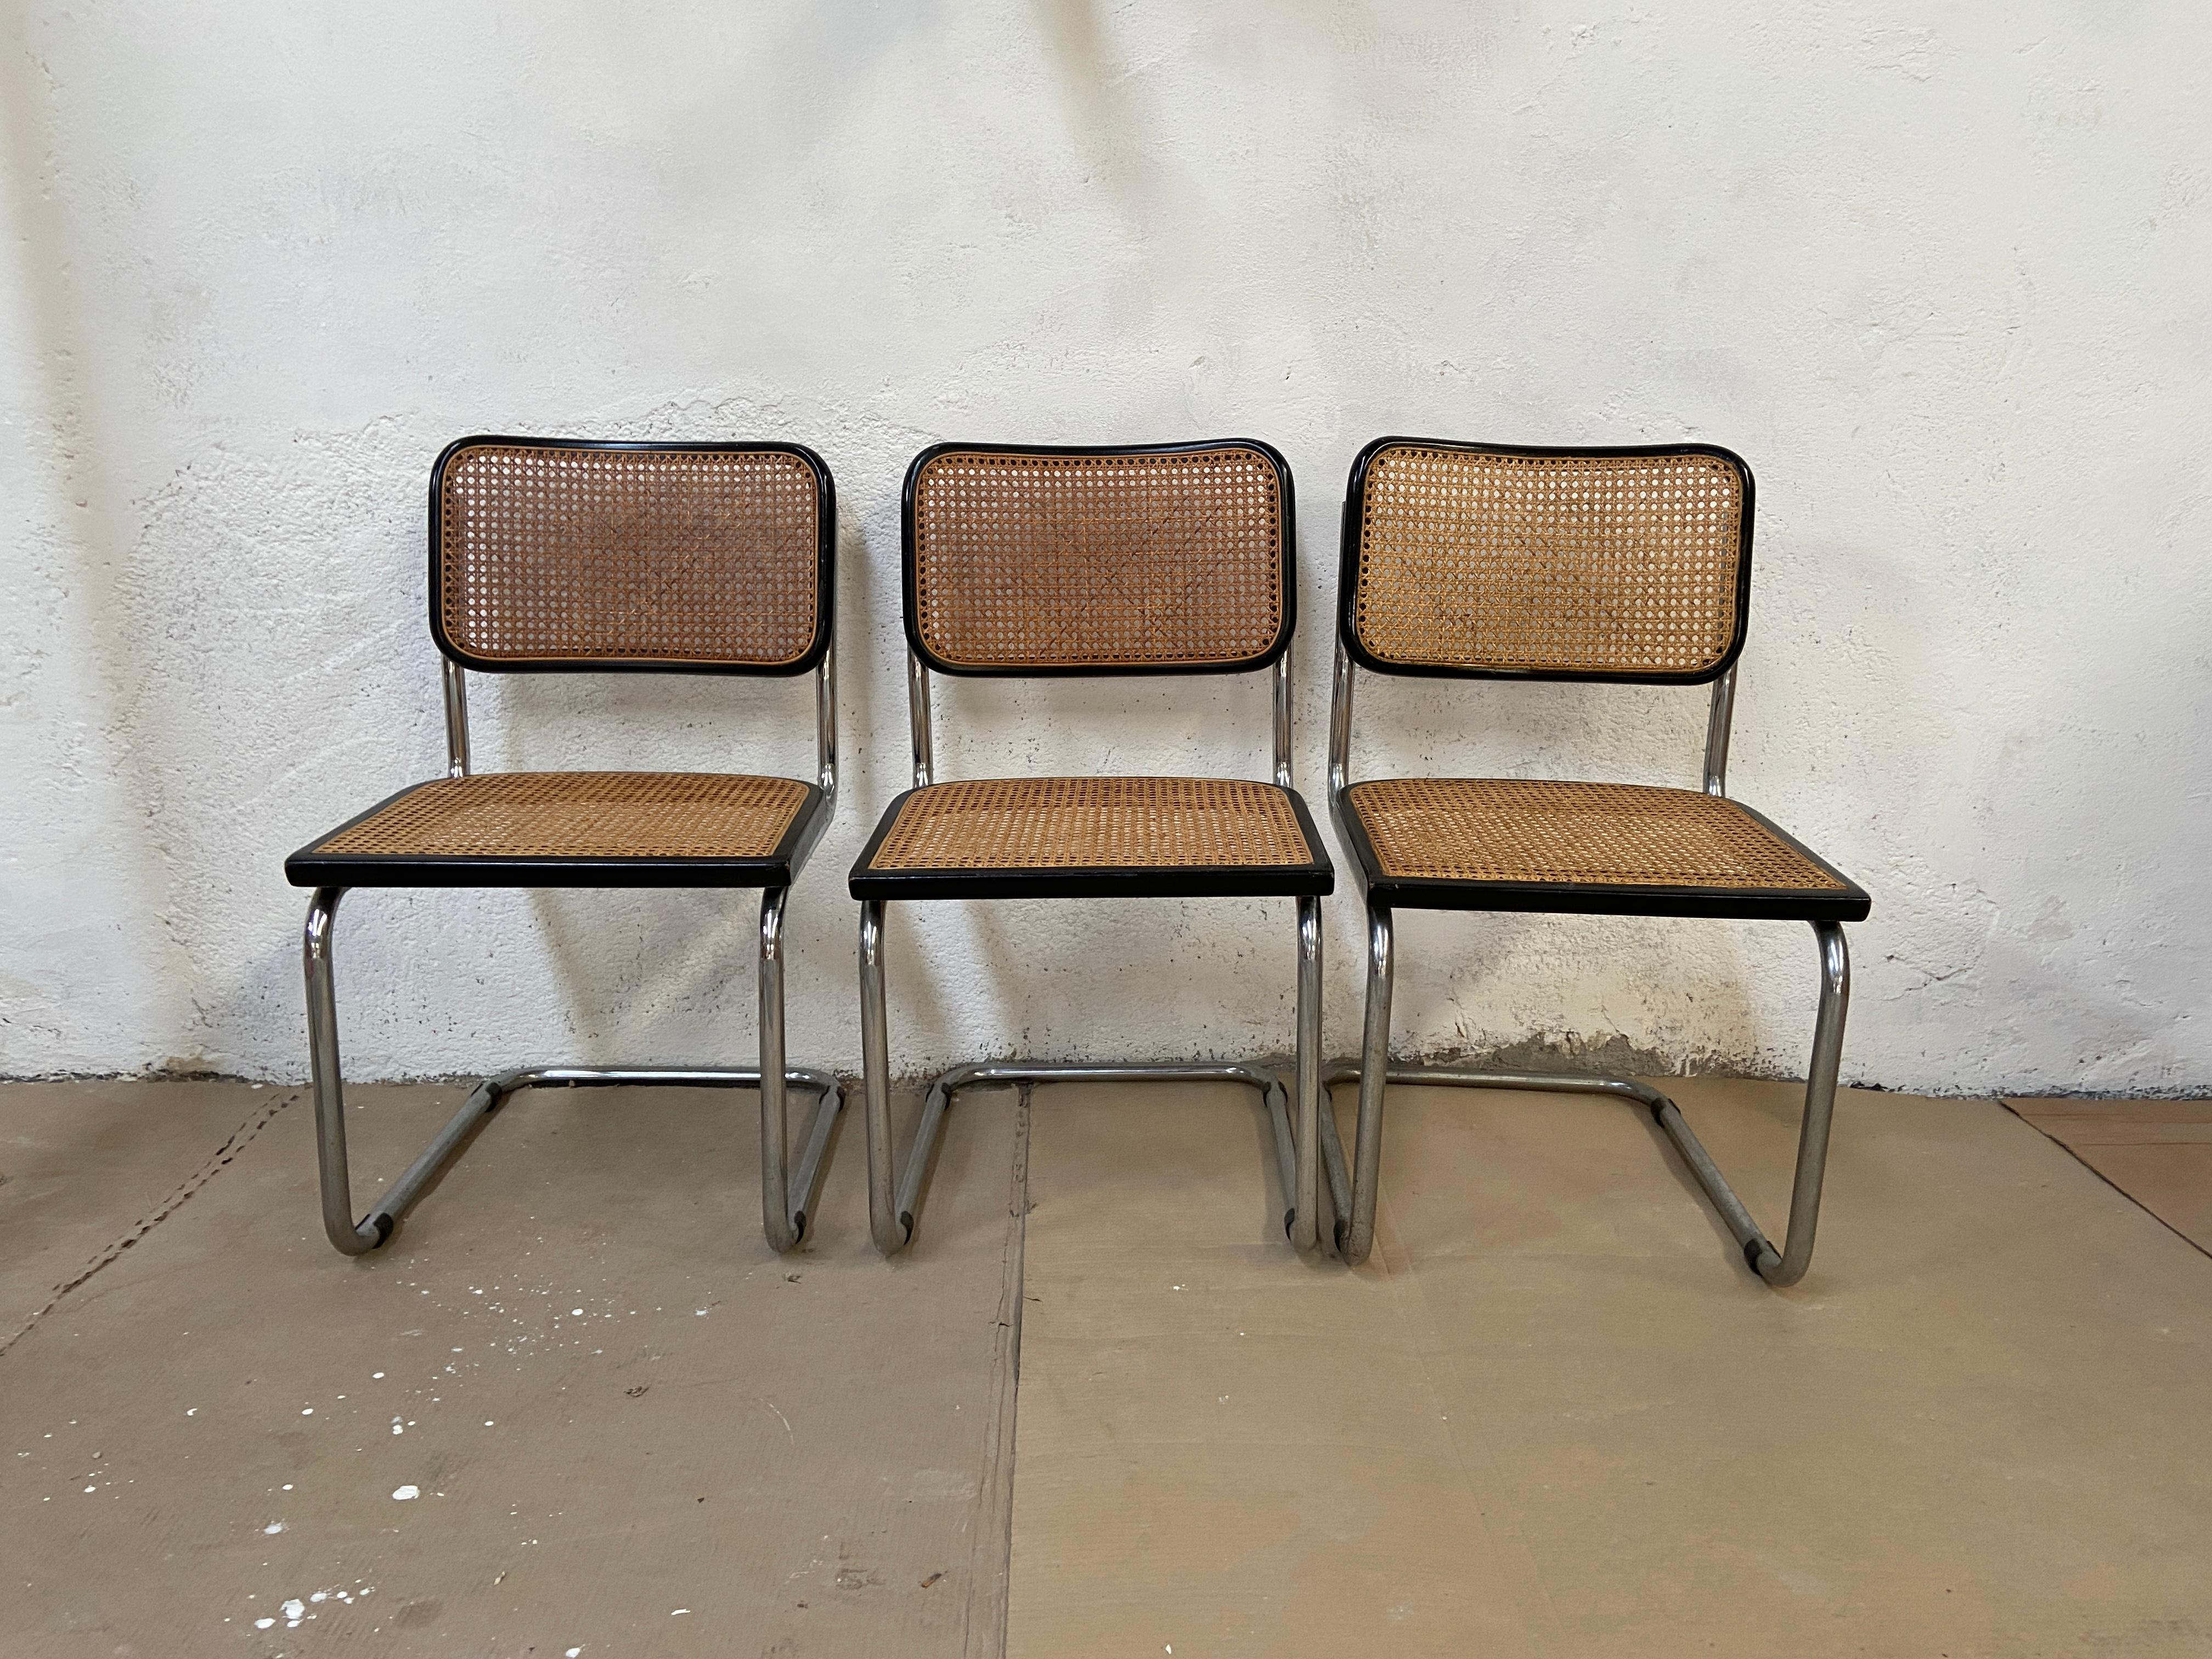 Mid-Century Modern Italian set of 3 chrome cantilever Cesca chair with black lacquered wood profiles by Marcel Breuer.
The chairs are in really good vintage conditions.
   